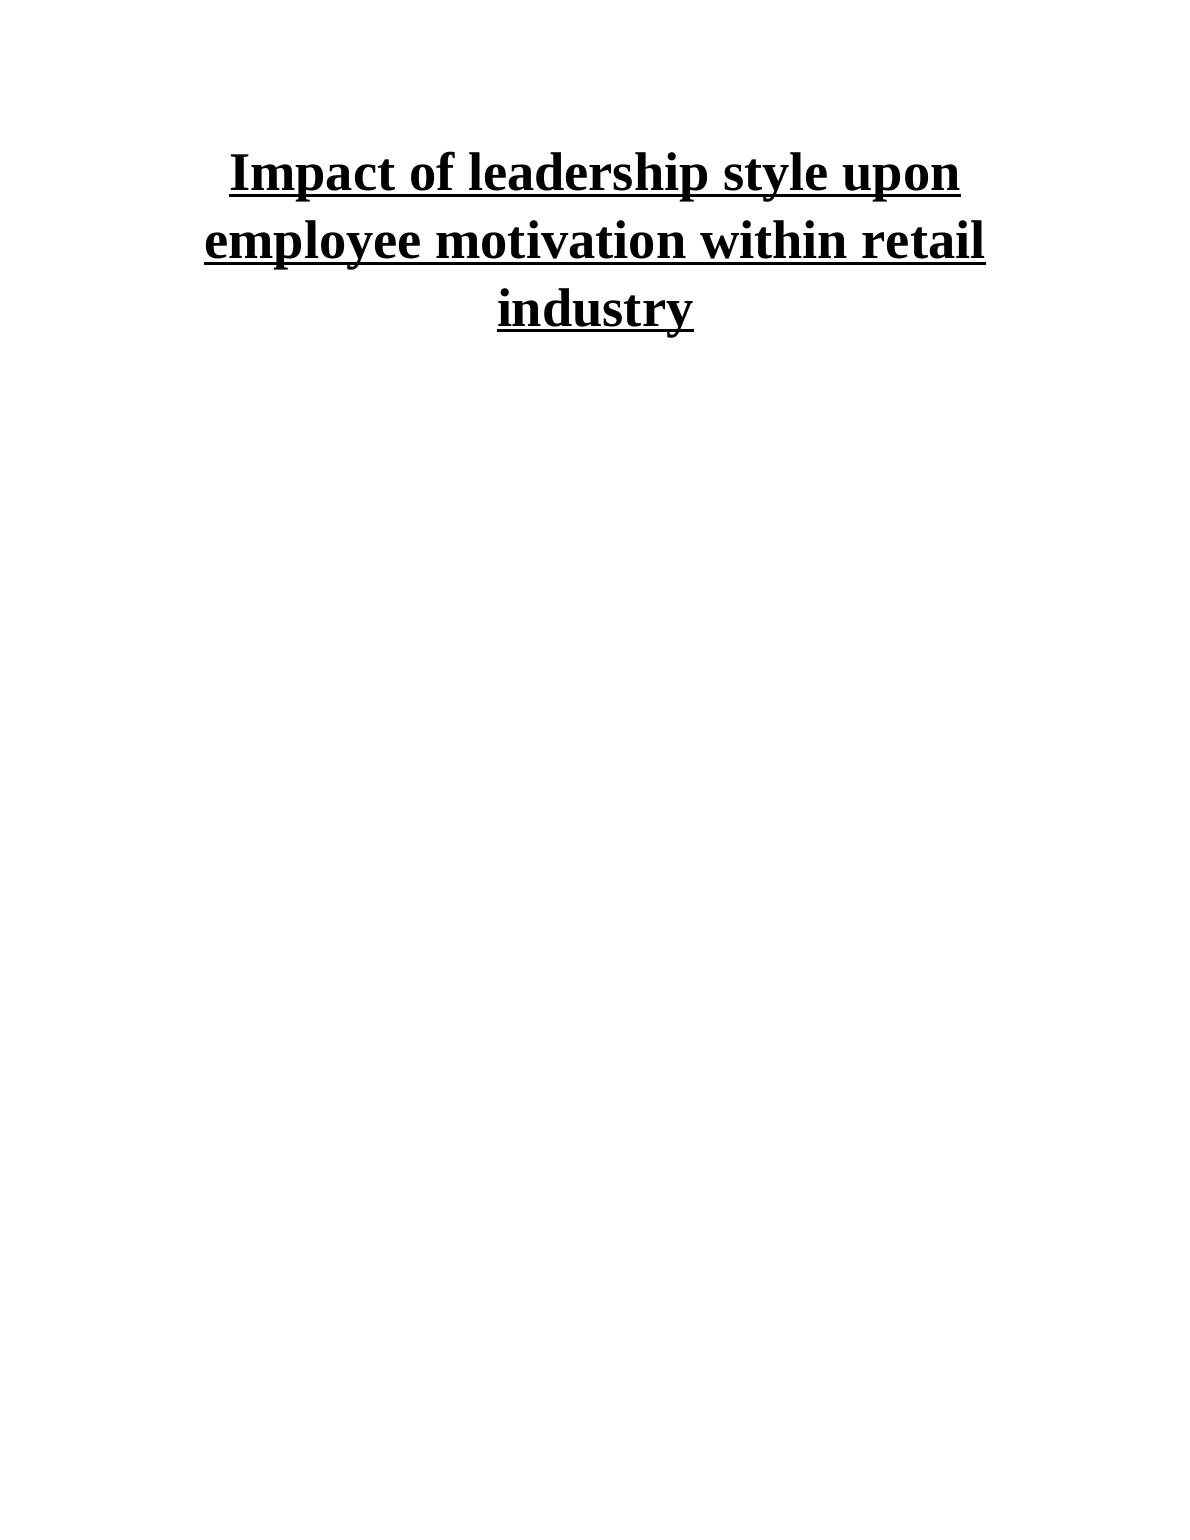 Impact of leadership style upon employee motivation within retail industry_1